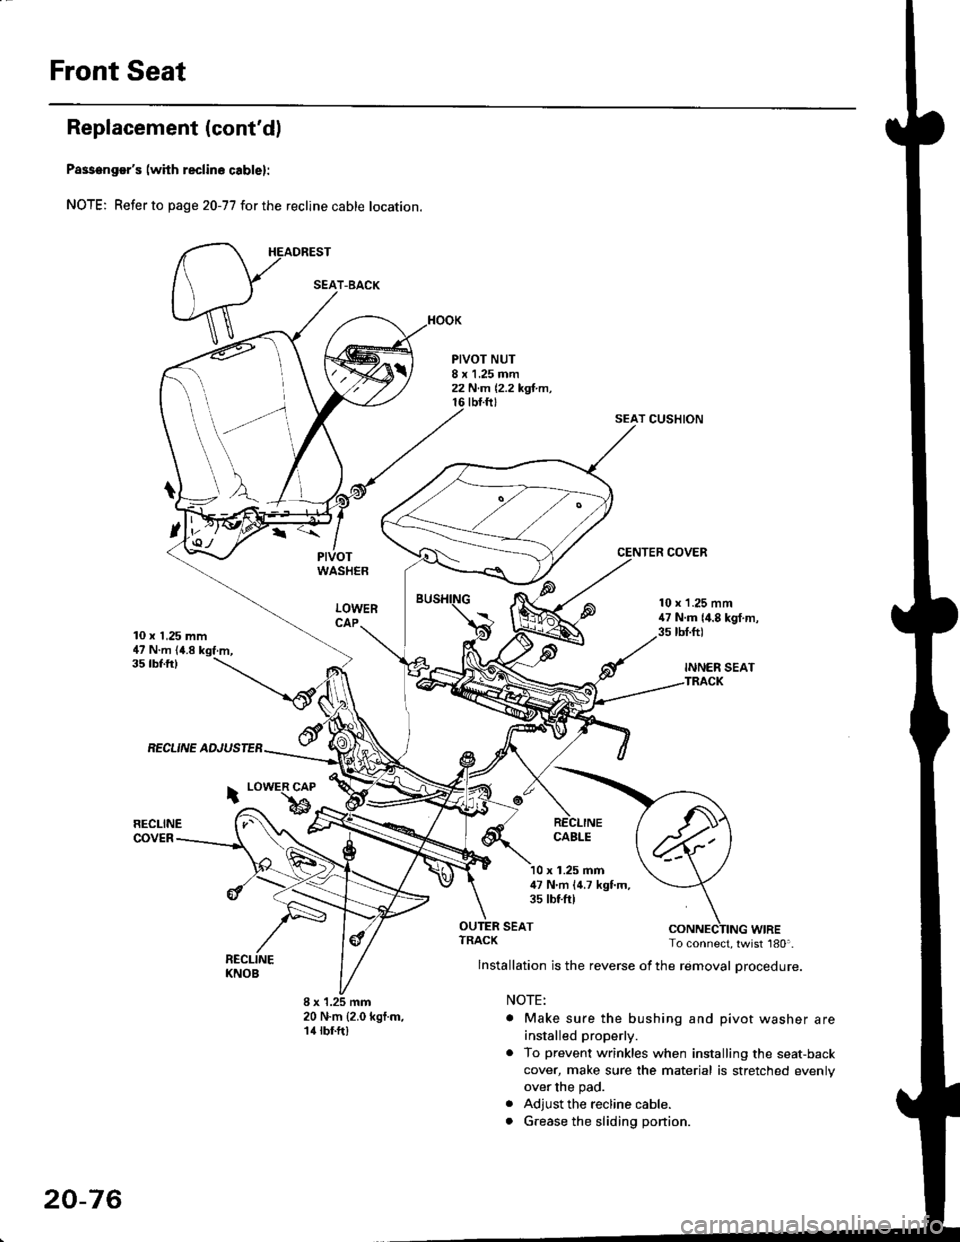 HONDA CIVIC 1997 6.G Workshop Manual Front Seat
Replacement (contd)
Passengers (with reclino cablel:
NOTE; Refer to page 20-77 for the recline cable location.
HEADREST
PIVOTWASHER
LOWERCAP
PIVOT NUT8 x 1.25 mm22 N.m 12,2 kgl.m,tbt.ftt
